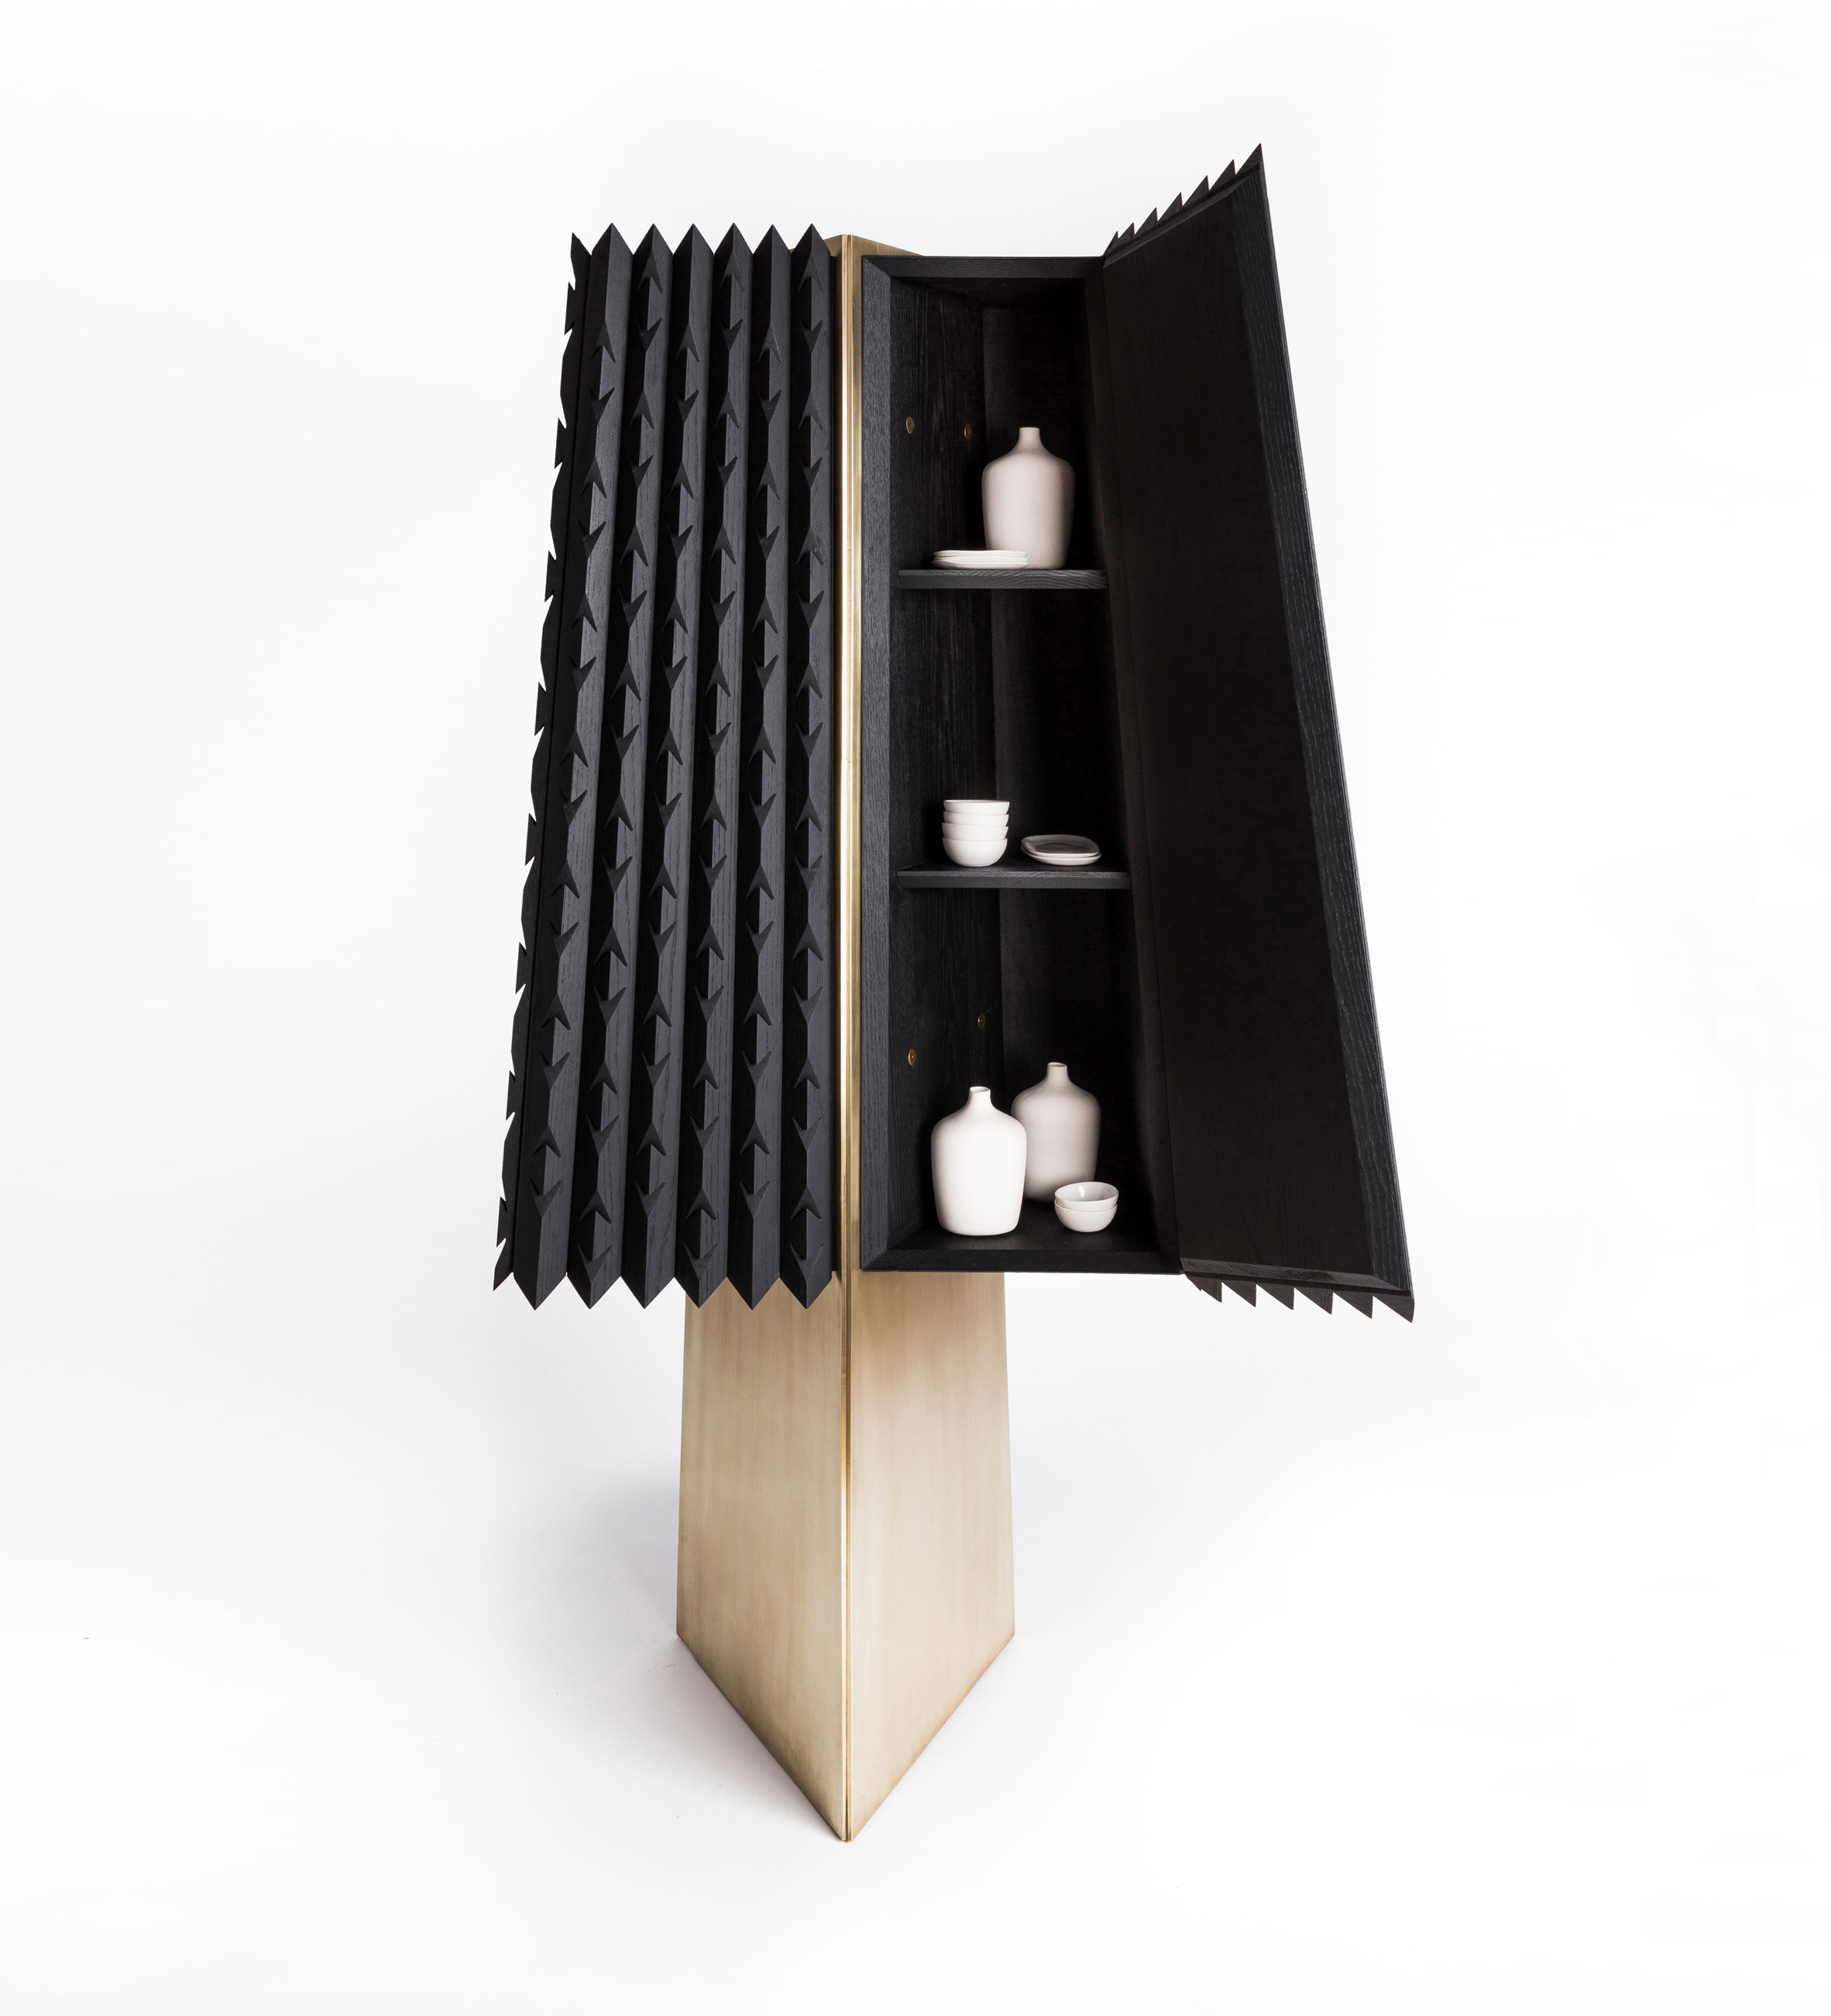 agave-collection-by-esrawe-mezcal-cabinet-mexico_dezeen_2